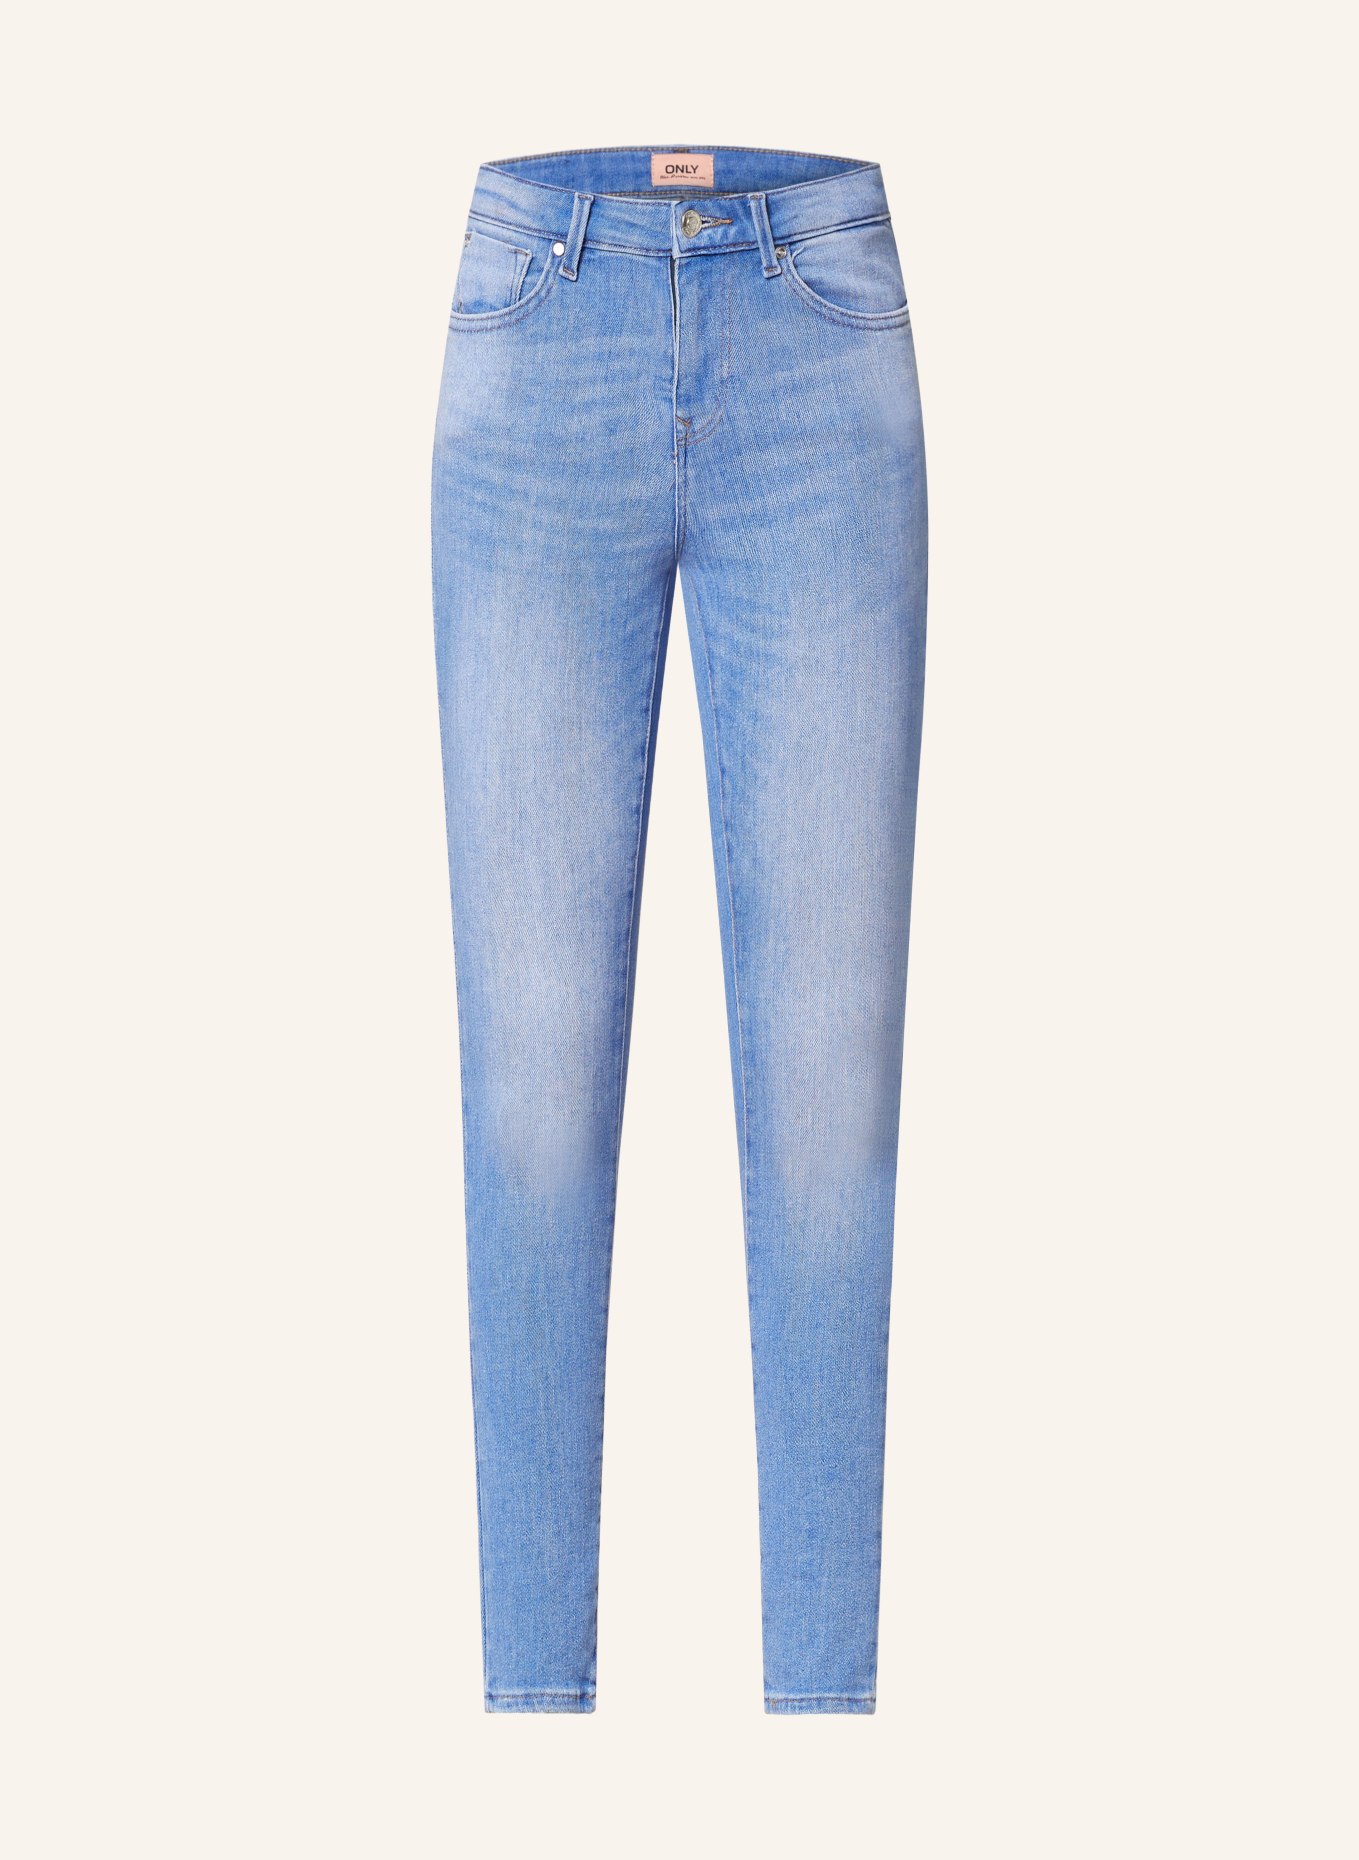 ONLY Skinny jeans, Color: Special Bright Blue Denim (Image 1)